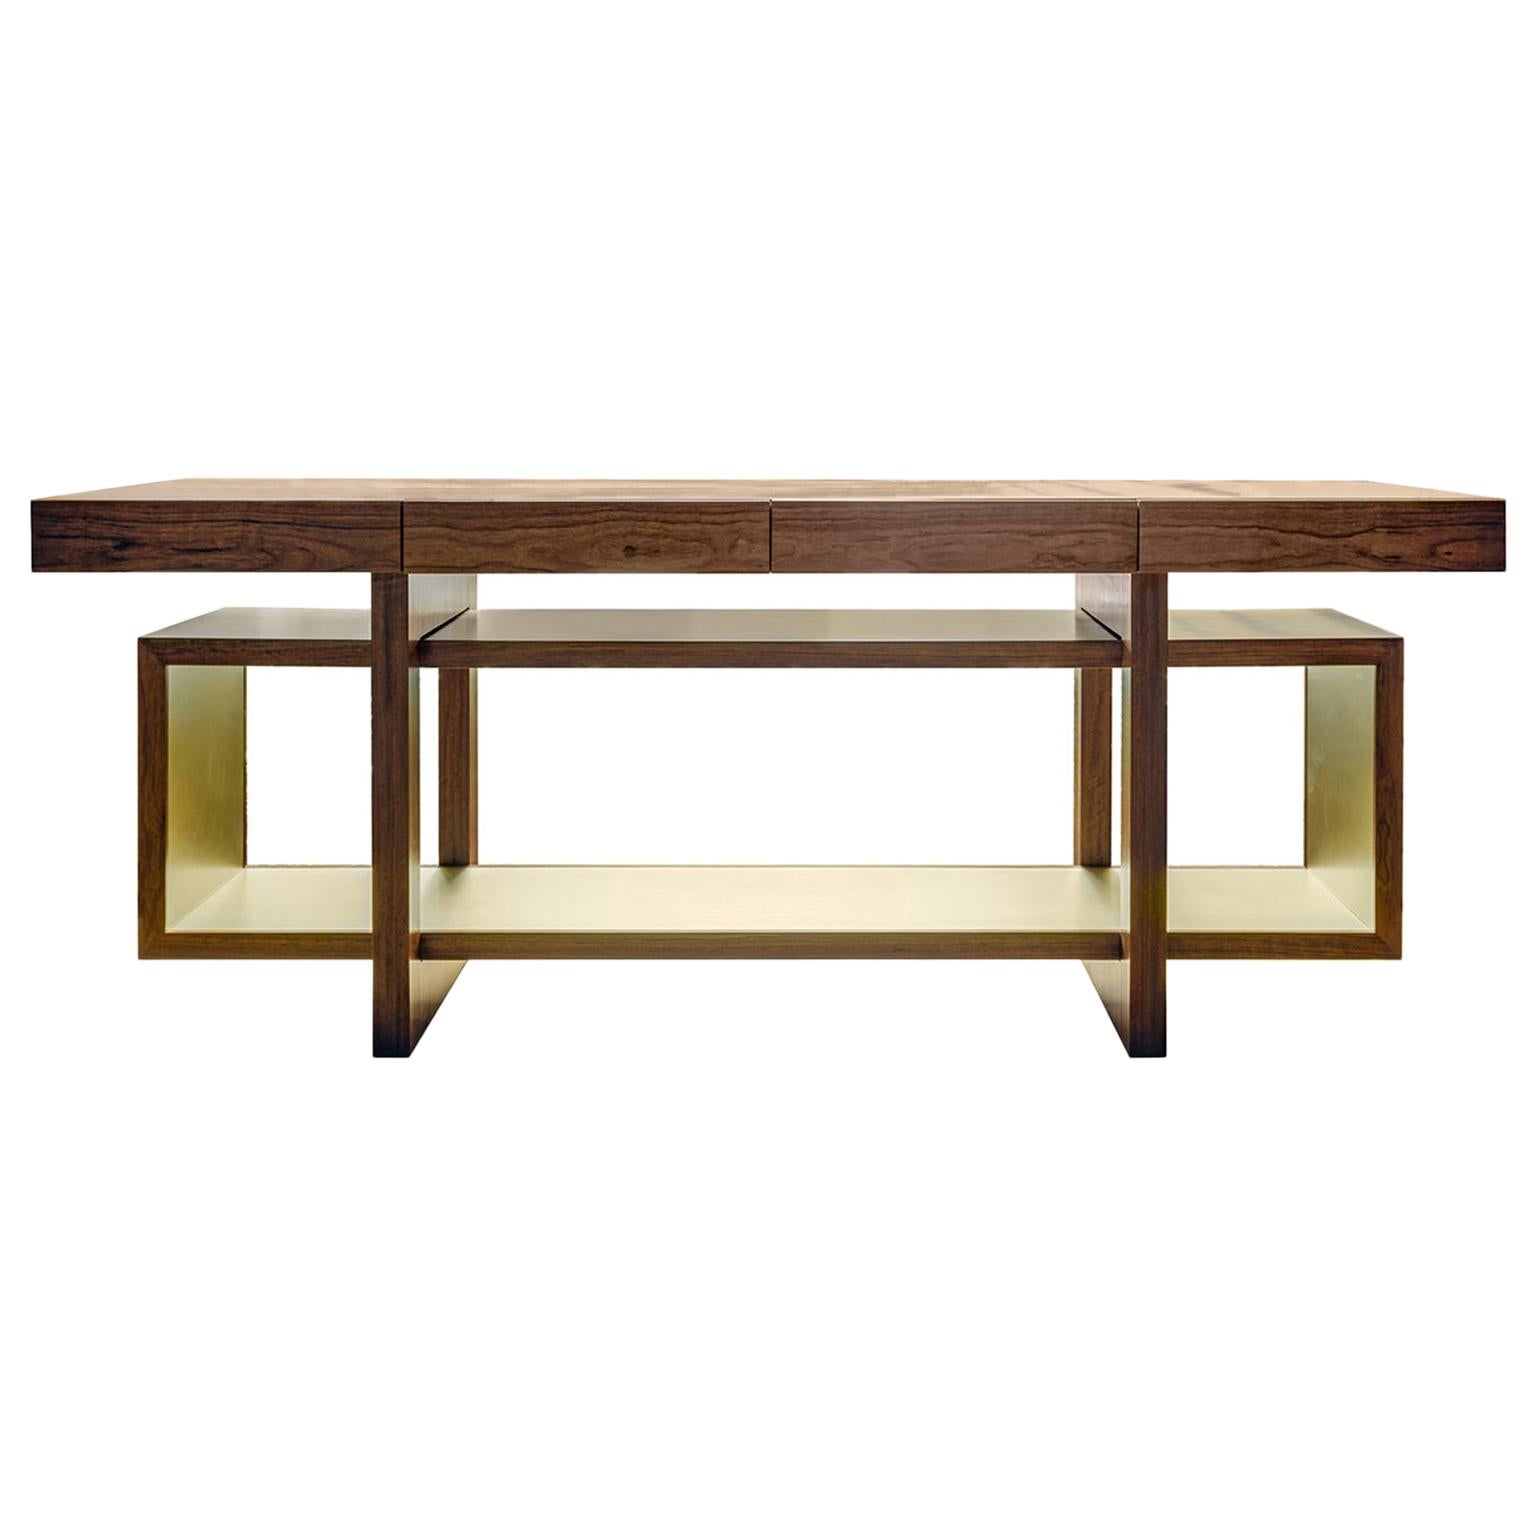 Contemporary Handcrafted Console "Oeneus" in Wood, Lined with Brass by Anaktae